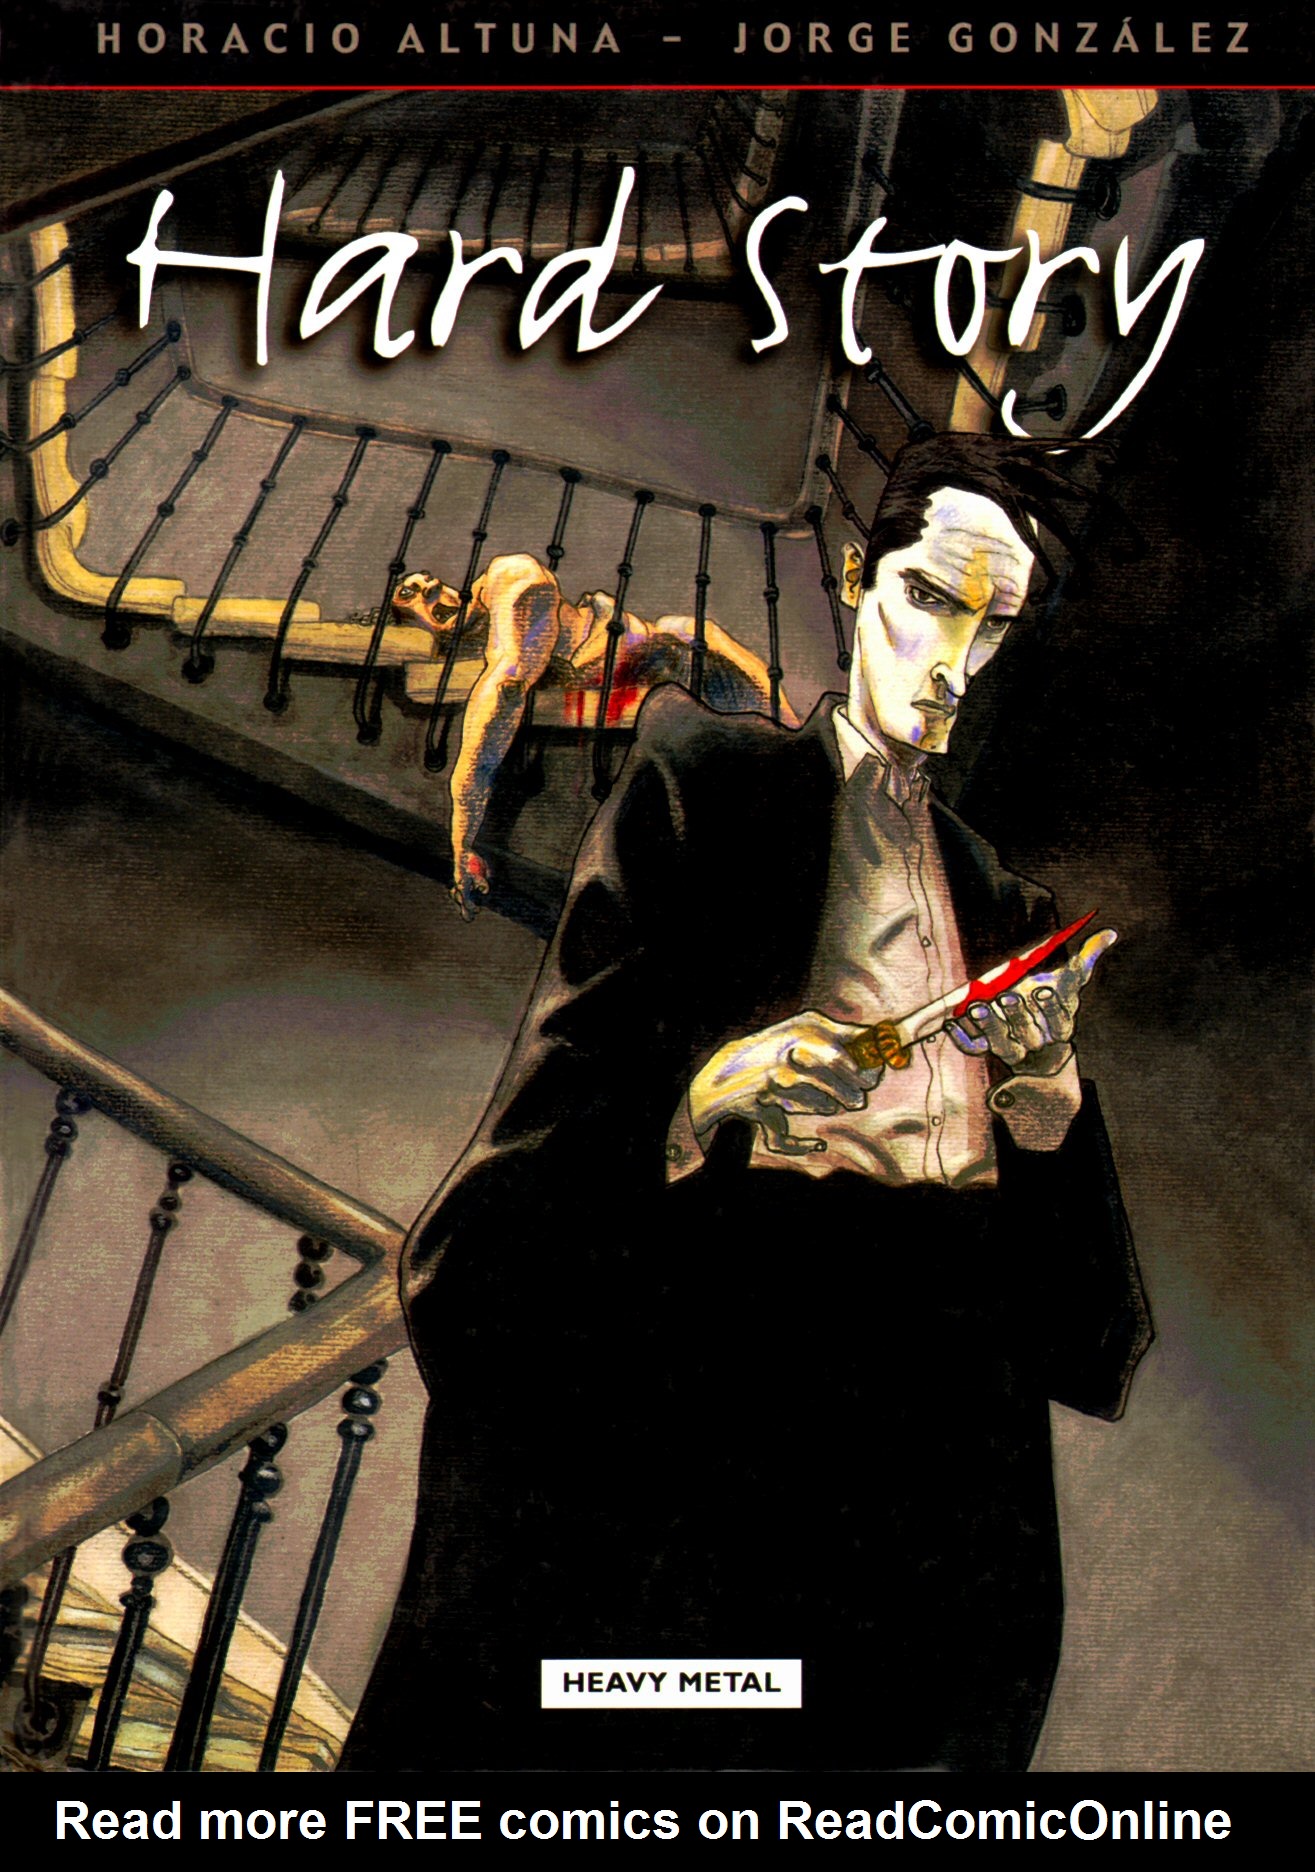 Read online Hard Story comic -  Issue # Full - 1